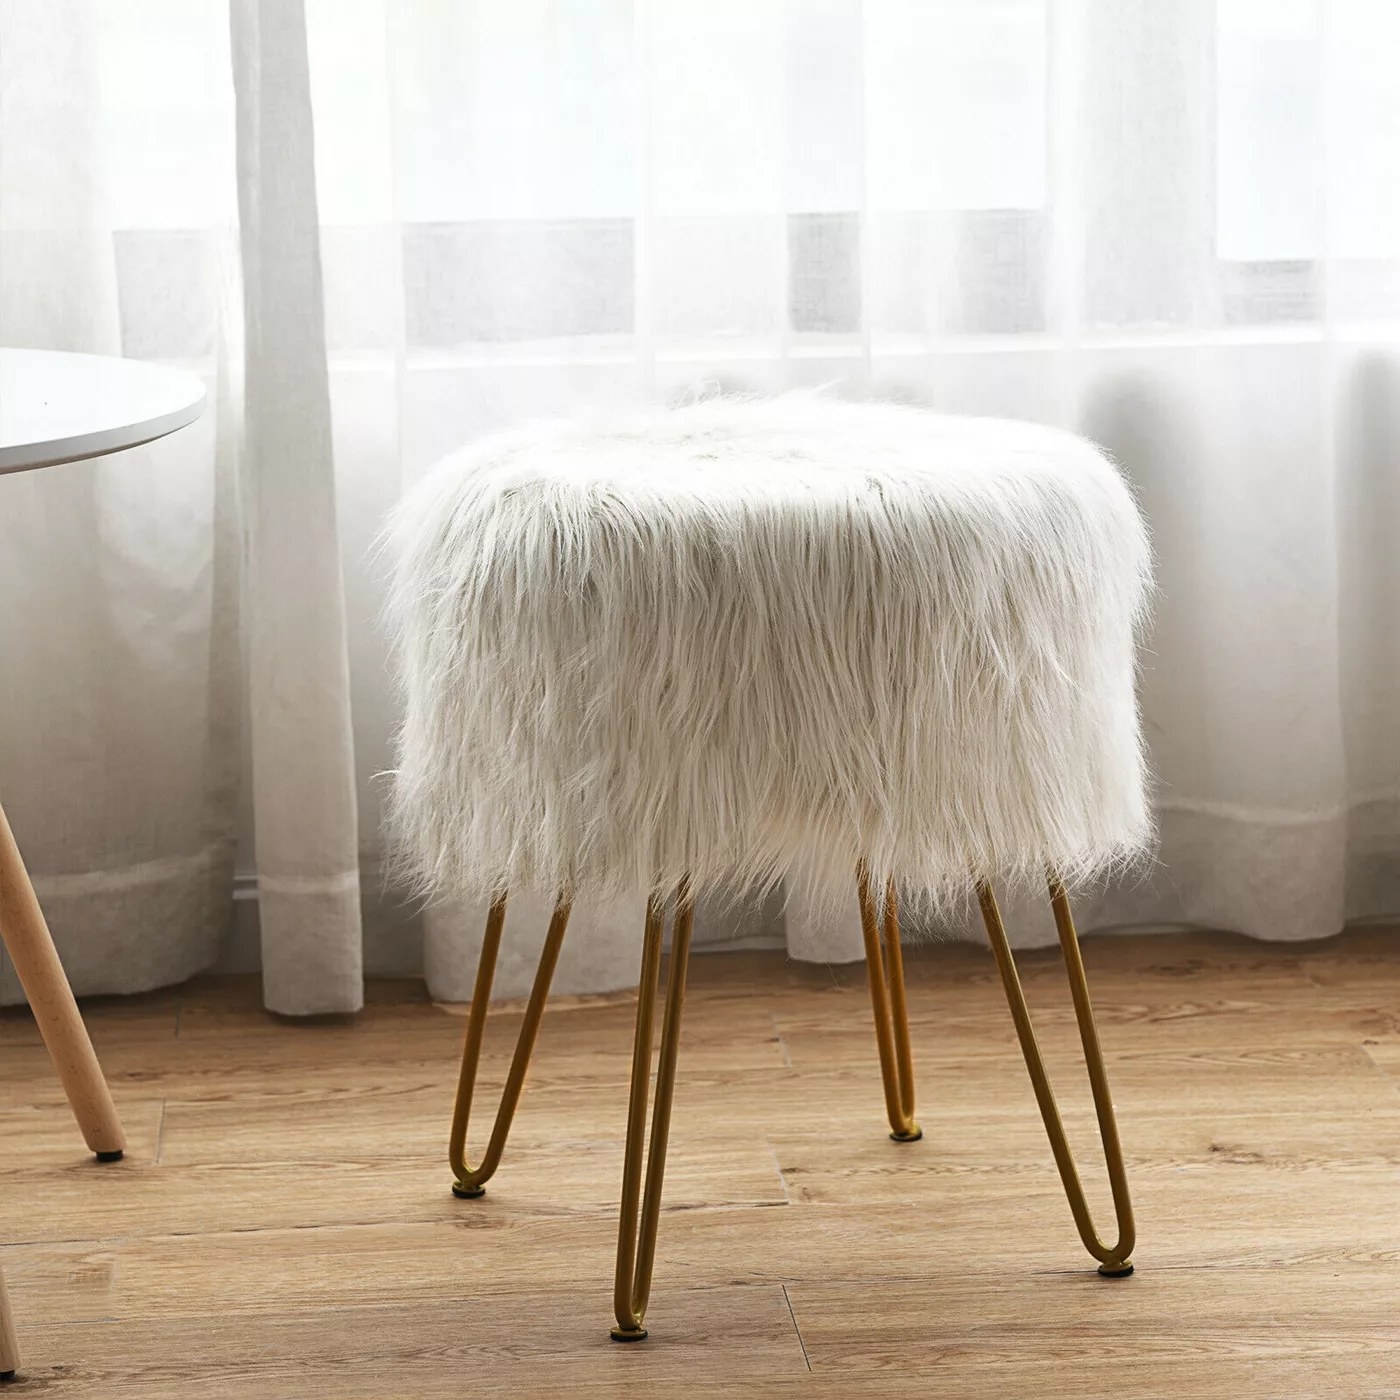 The white fur stool with gold legs